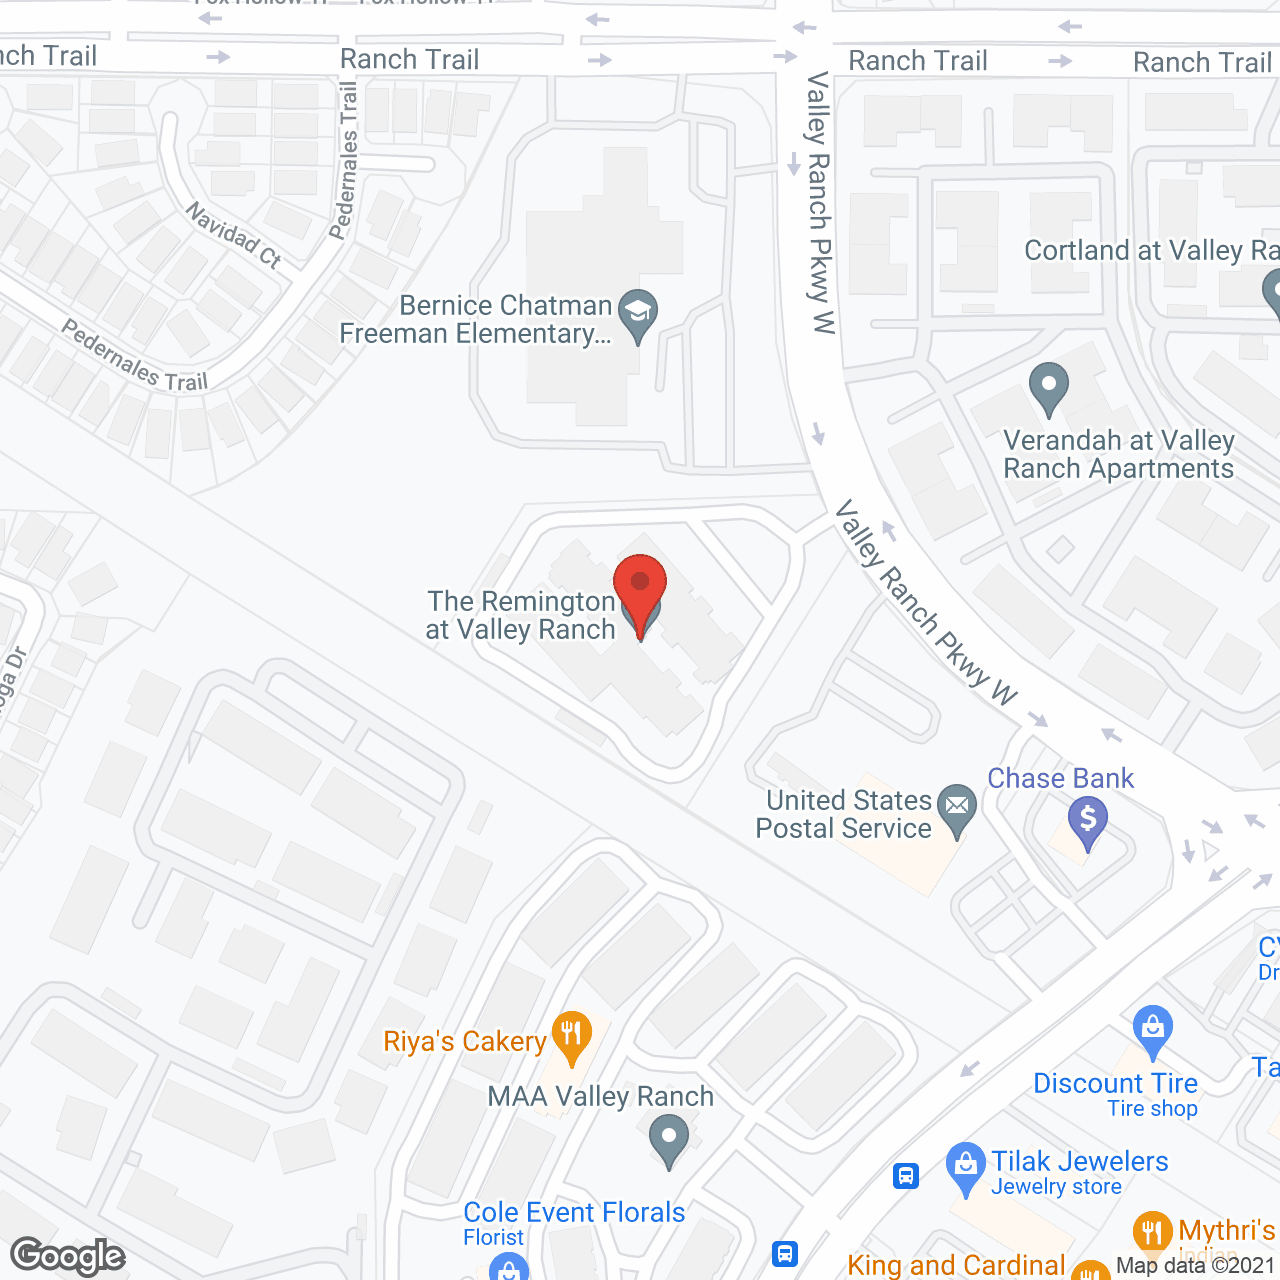 The Remington at Valley Ranch in google map